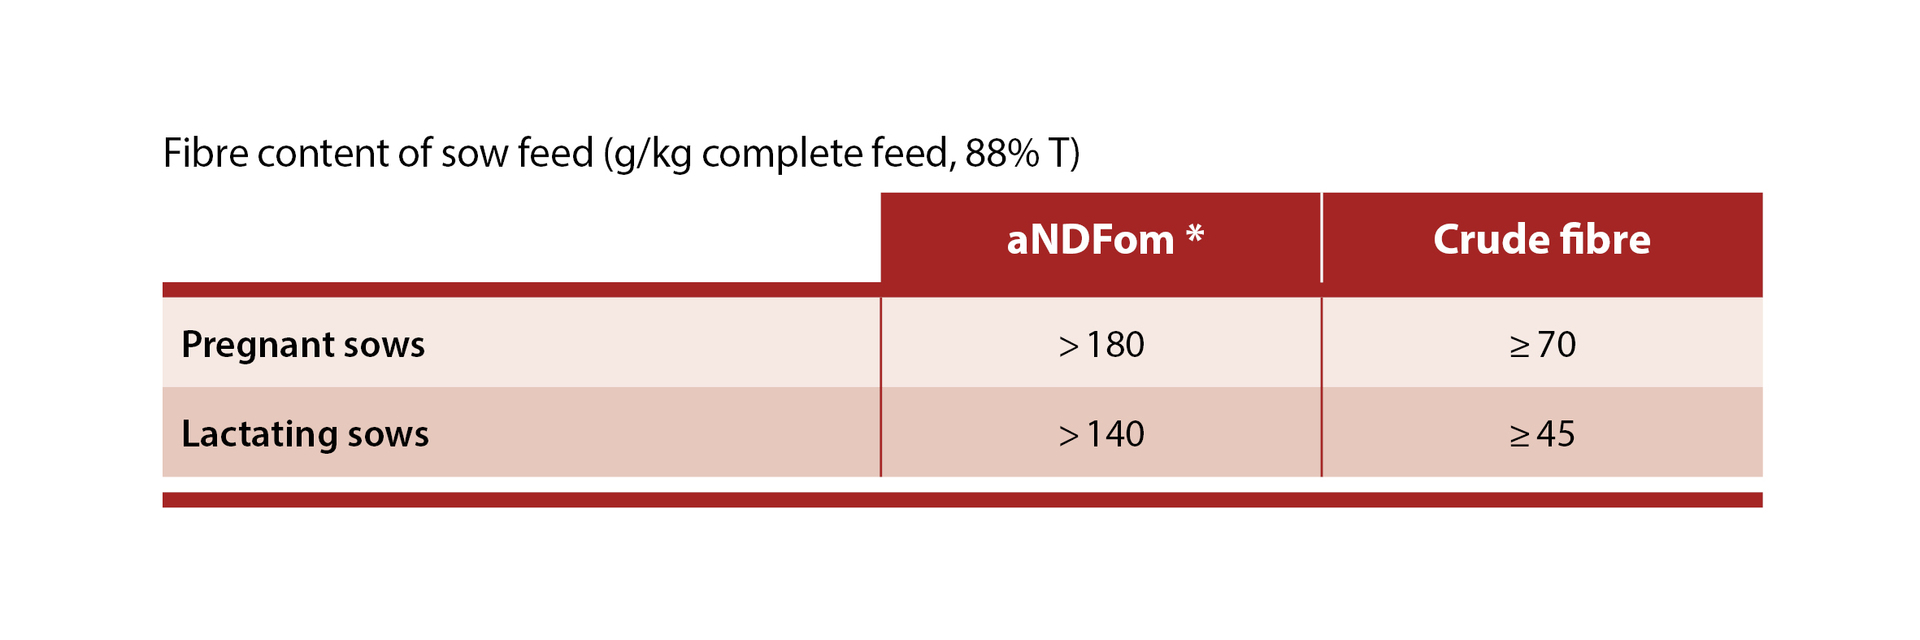 Fibre content of sow feed